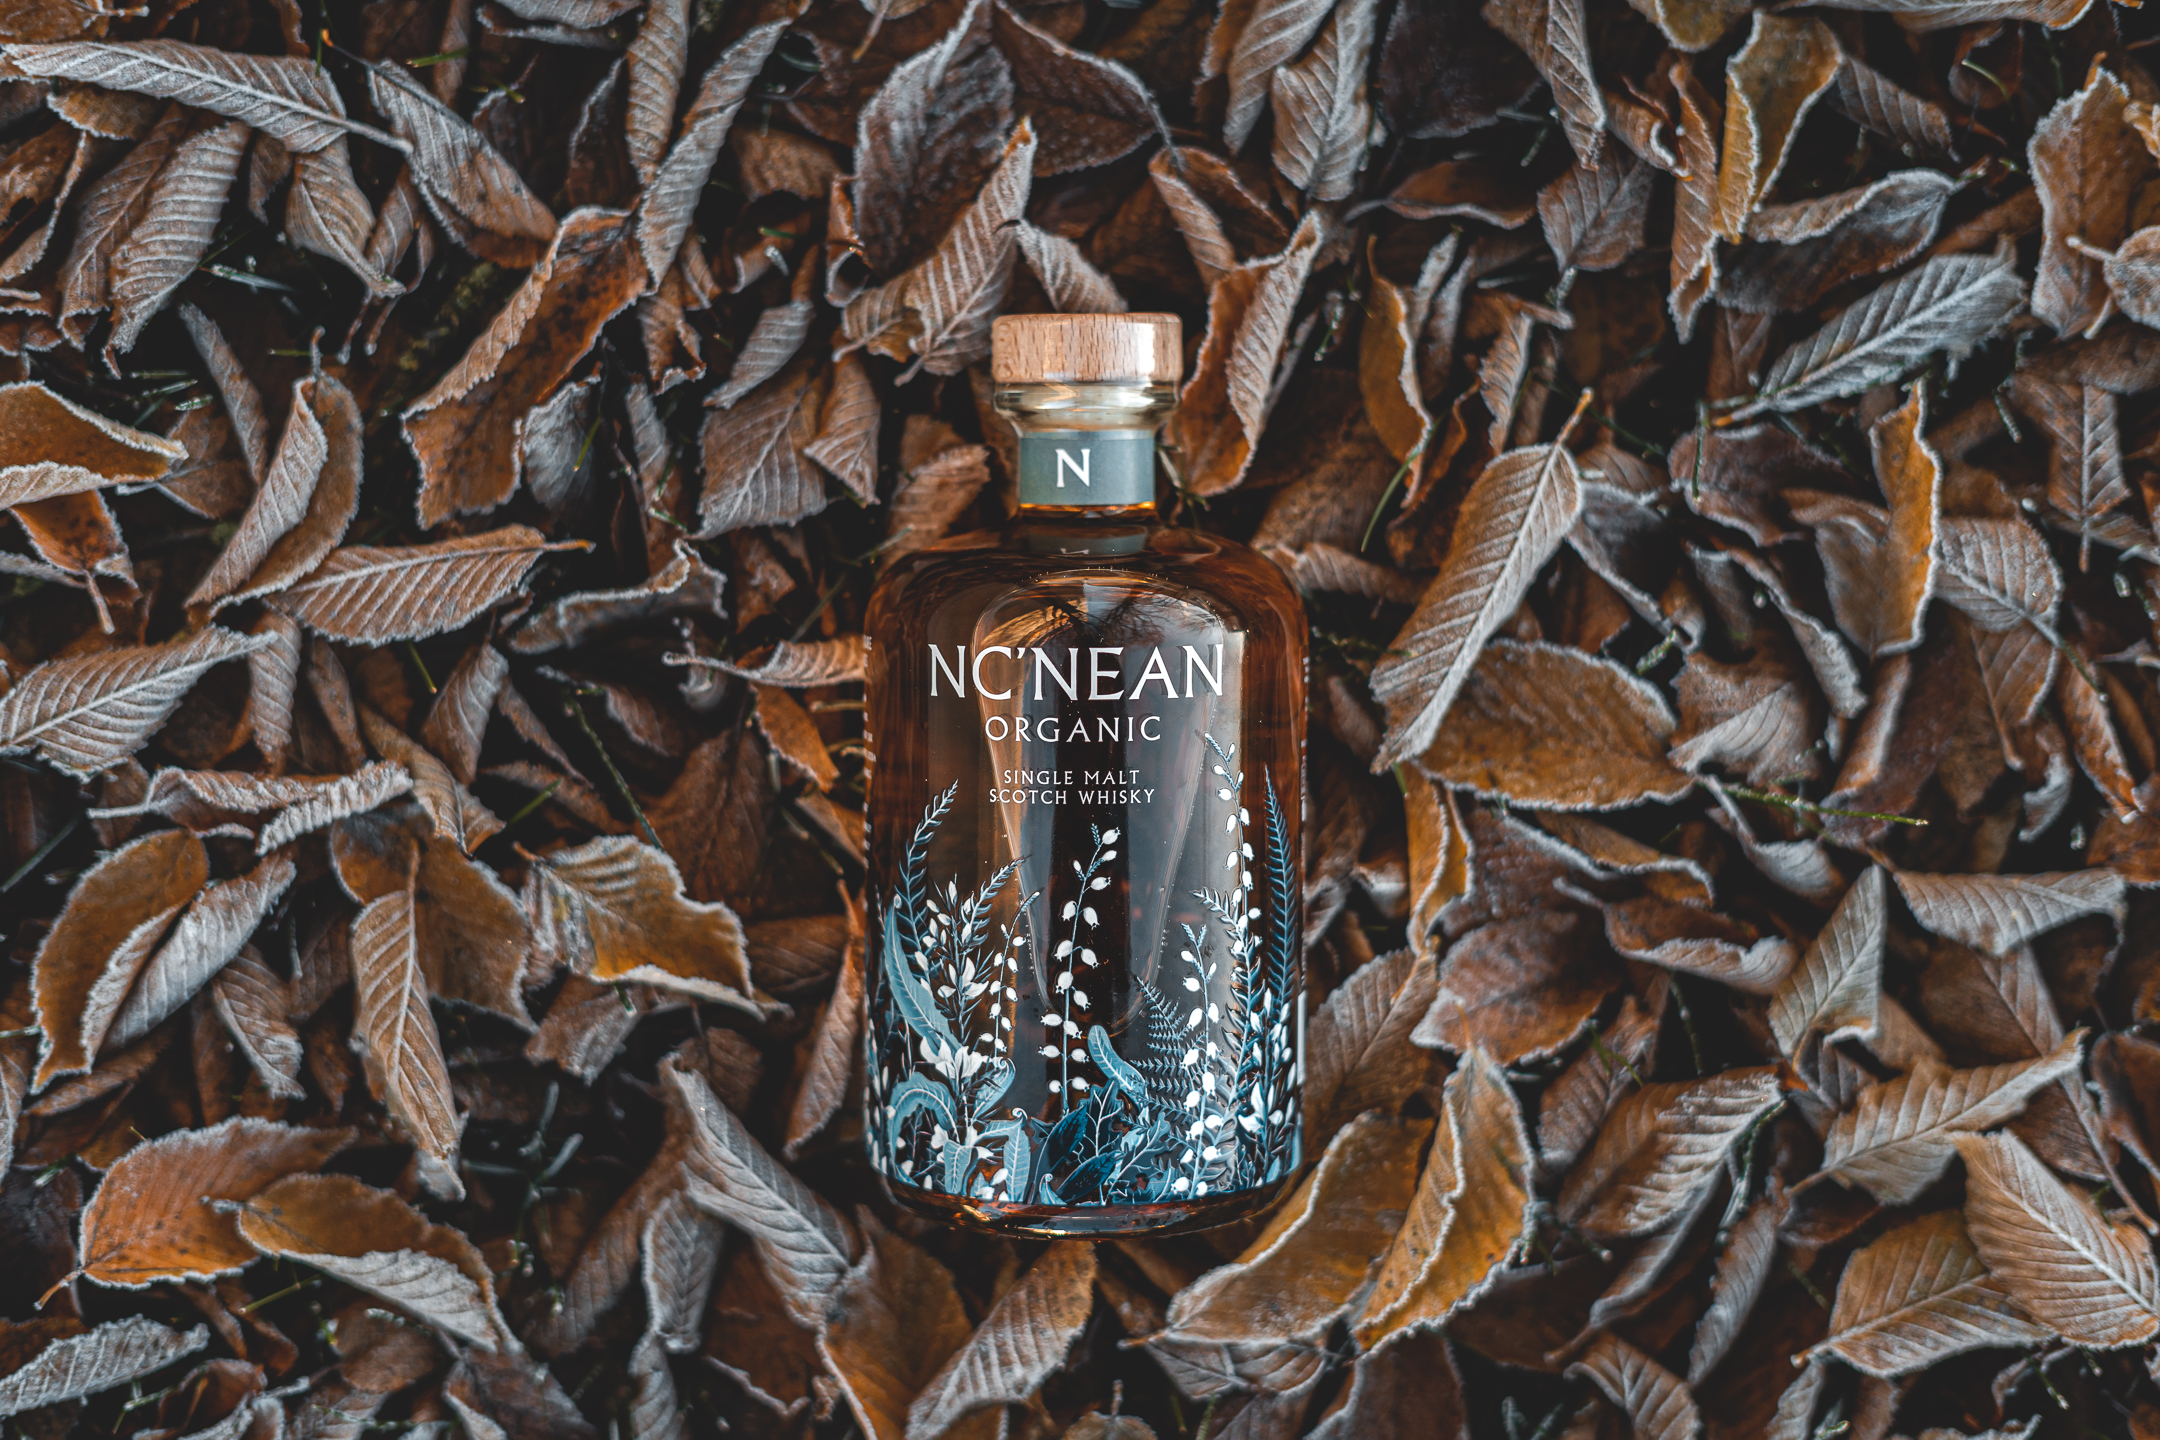 NC’NEAN Organic Single Malt Resting on a bed of fallen leaves.